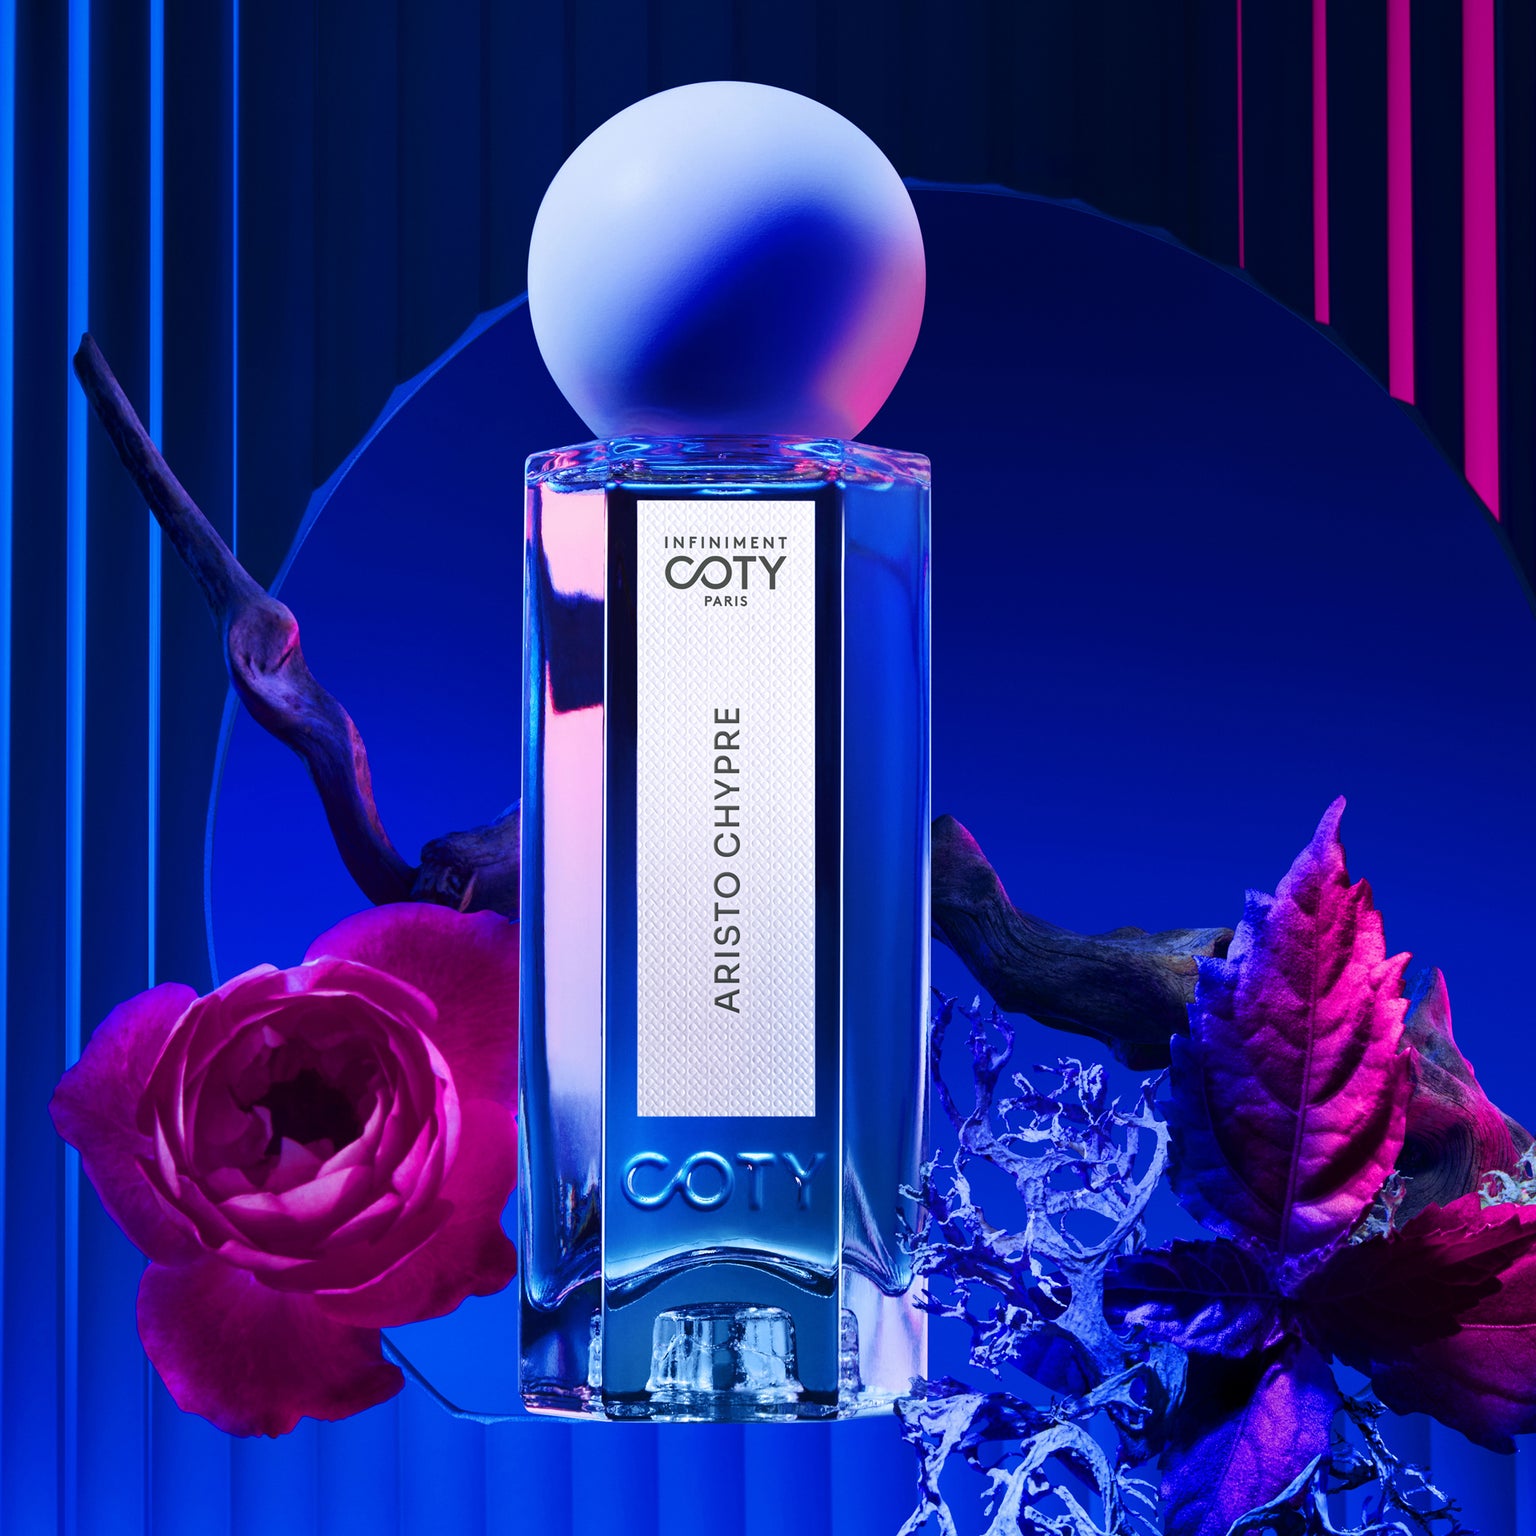 Infiniment Coty Paris perfume bottle and ingredient